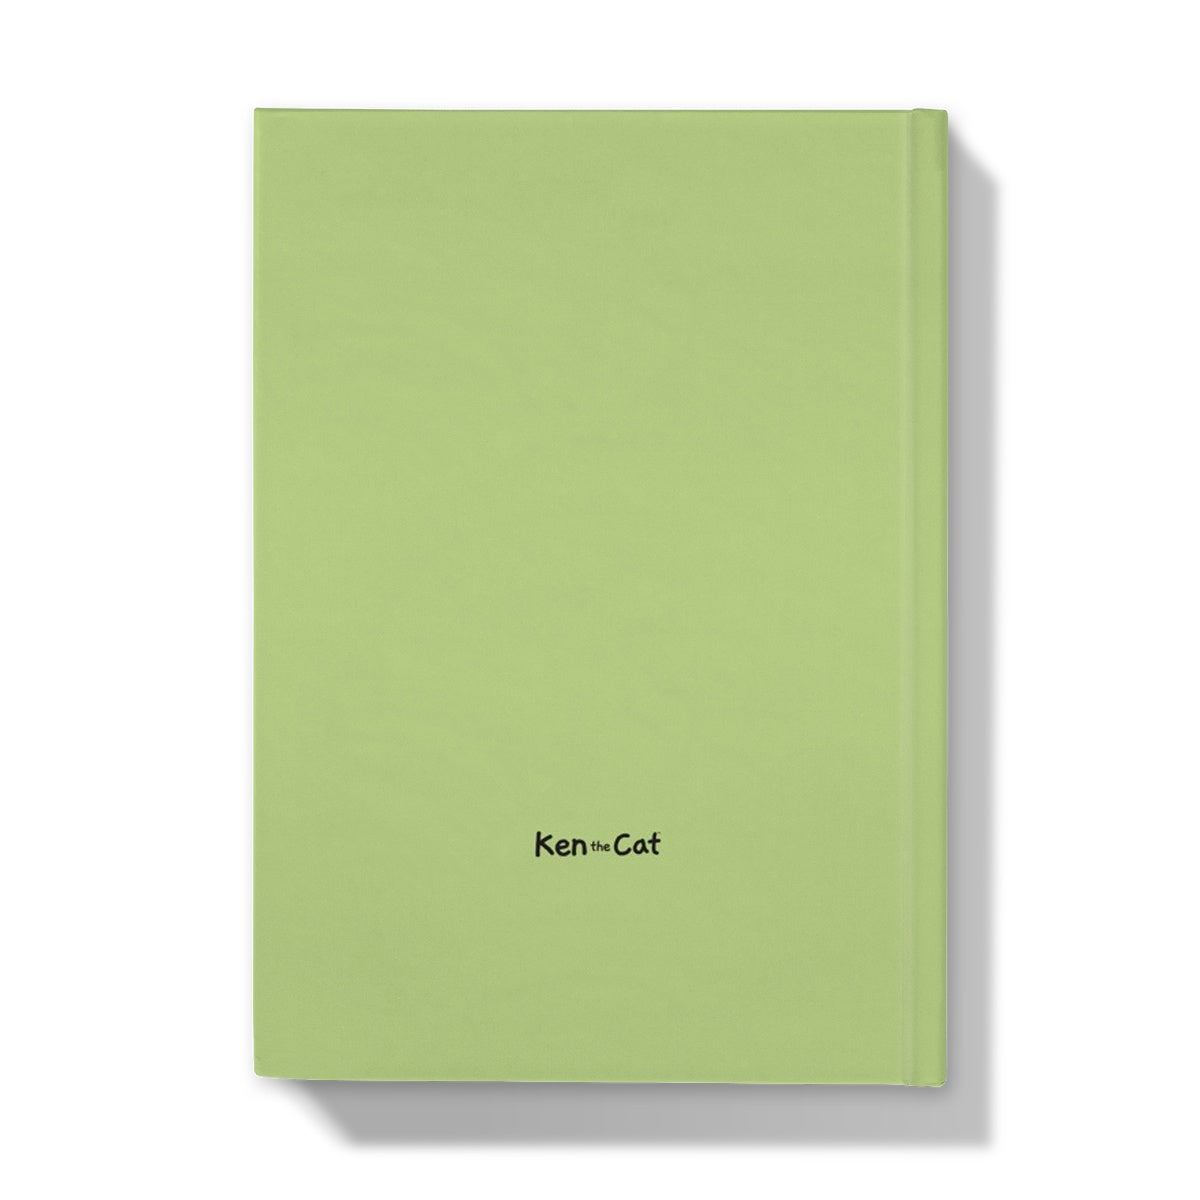 Ken the Cat sitting on laptop with notebook typo green A5 hardback journal front cover